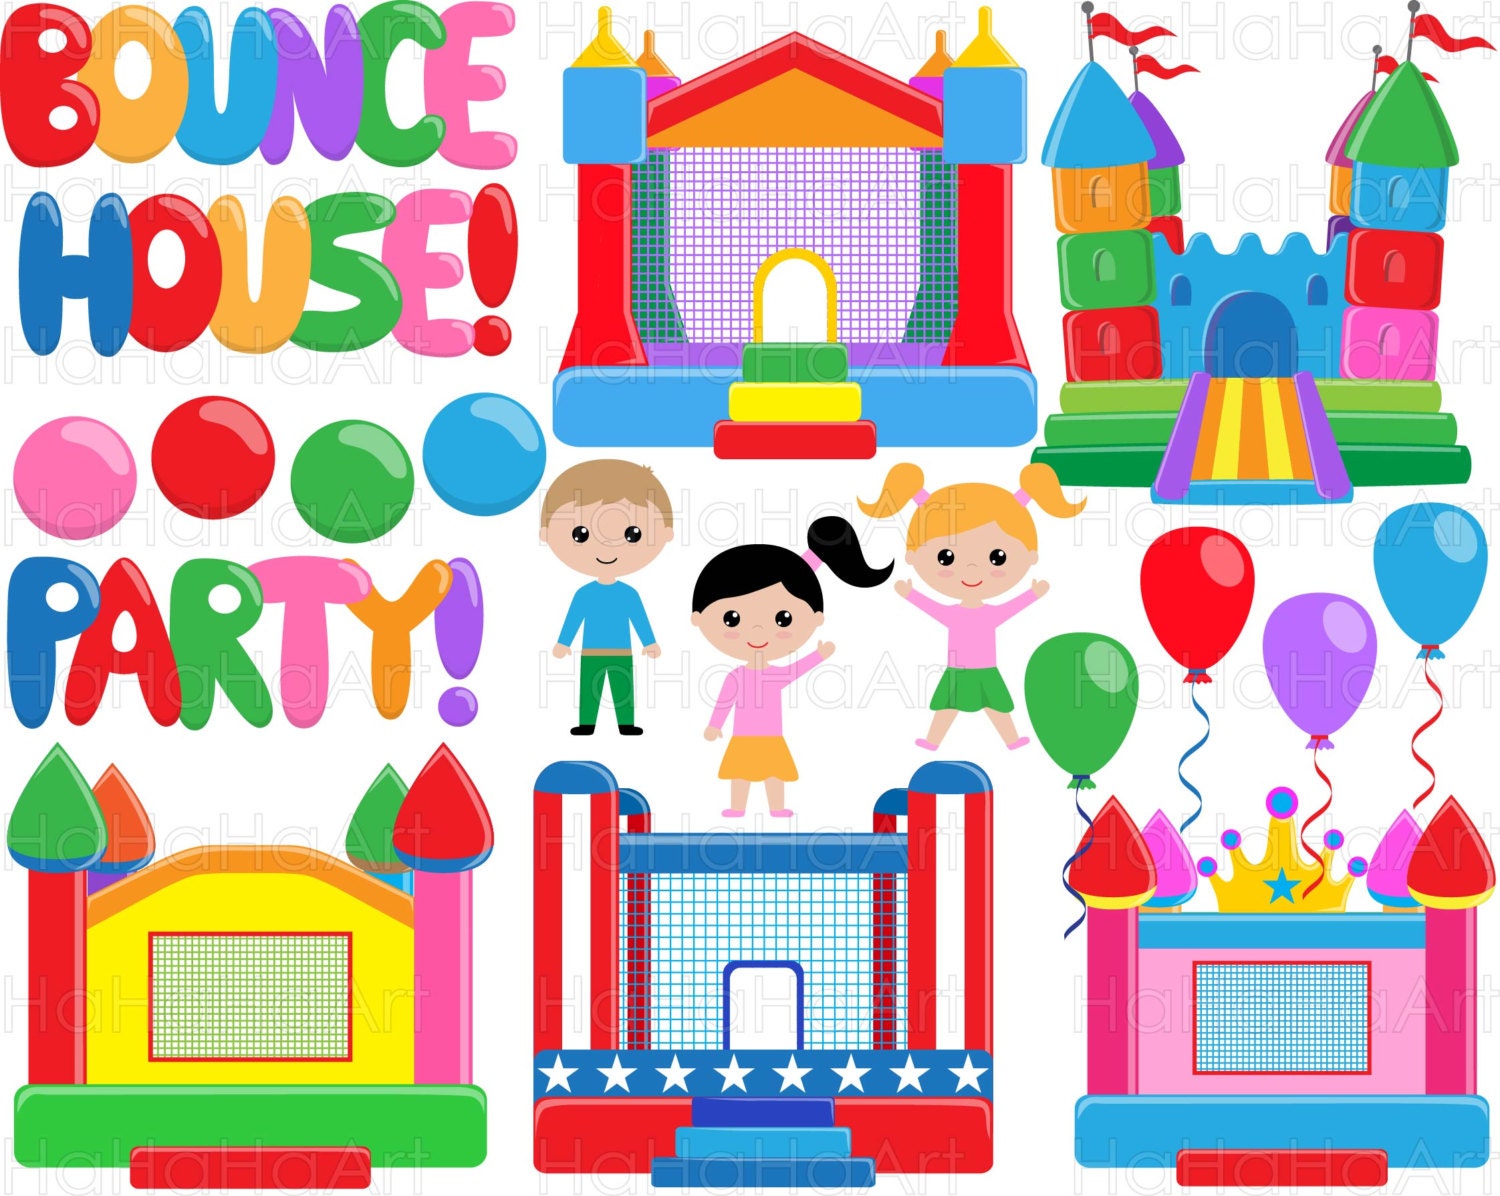 house party clip art free - photo #35